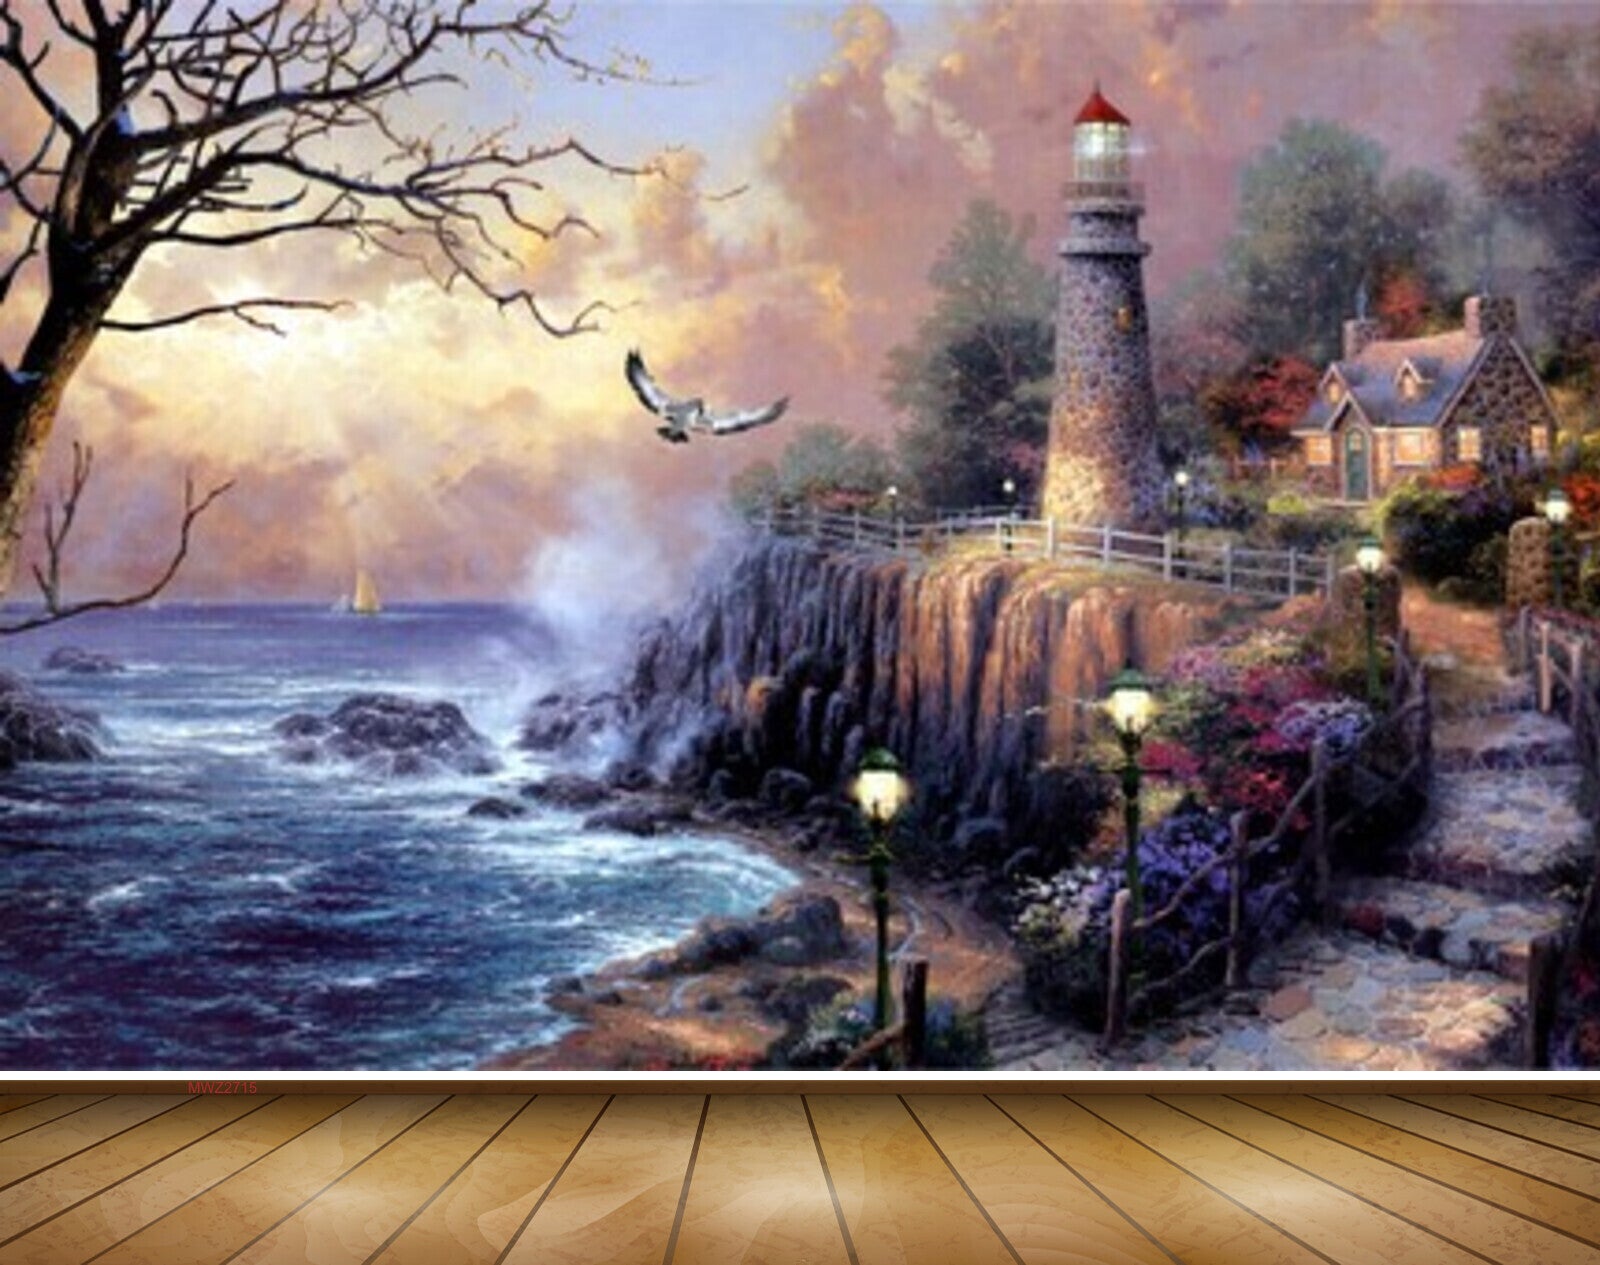 Avikalp MWZ2715 Trees River Sea Water Birds Lamps House Flowers Sunlight Clouds Stones Painting HD Wallpaper